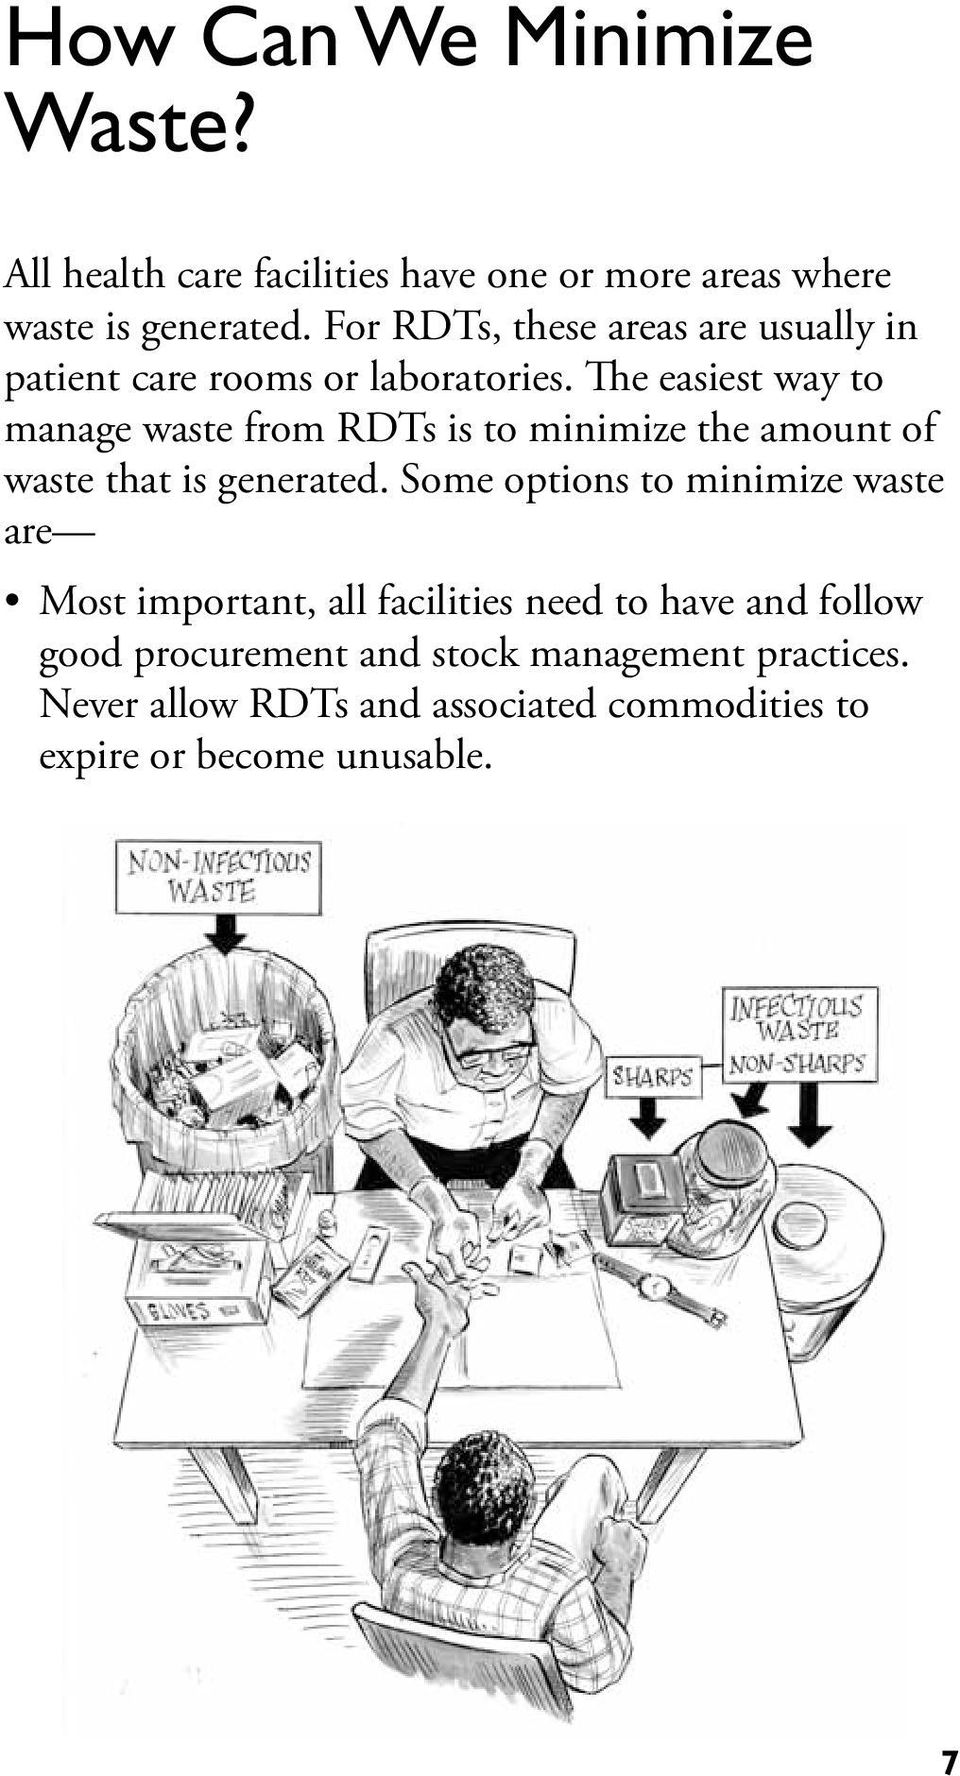 The easiest way to manage waste from RDTs is to minimize the amount of waste that is generated.